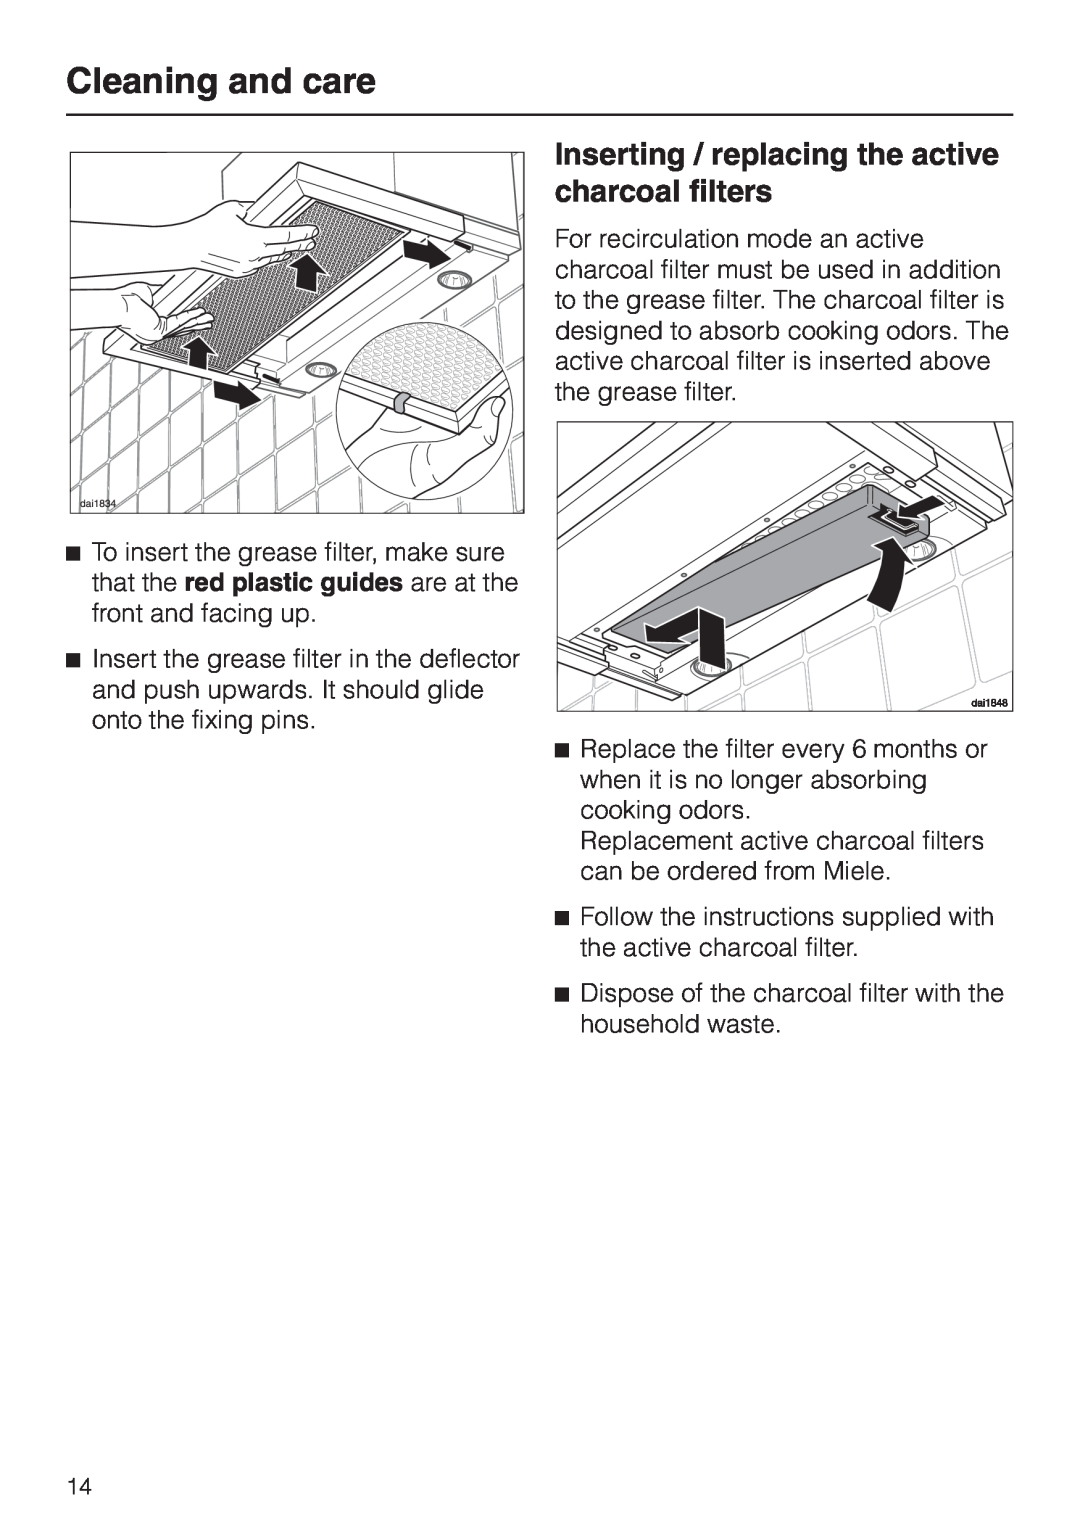 Miele DA 3160, DA 3180, DA3190 installation instructions Inserting / replacing the active charcoal filters, Cleaning and care 